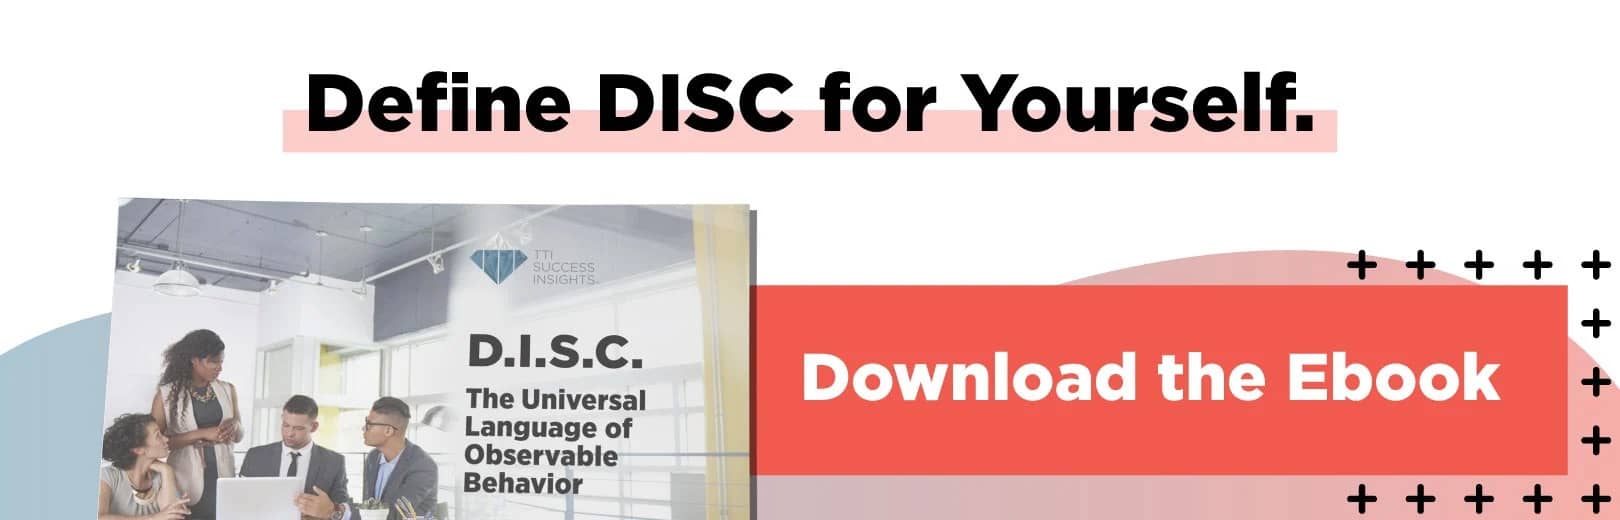 Define DISC for Yourself - Download Ebook